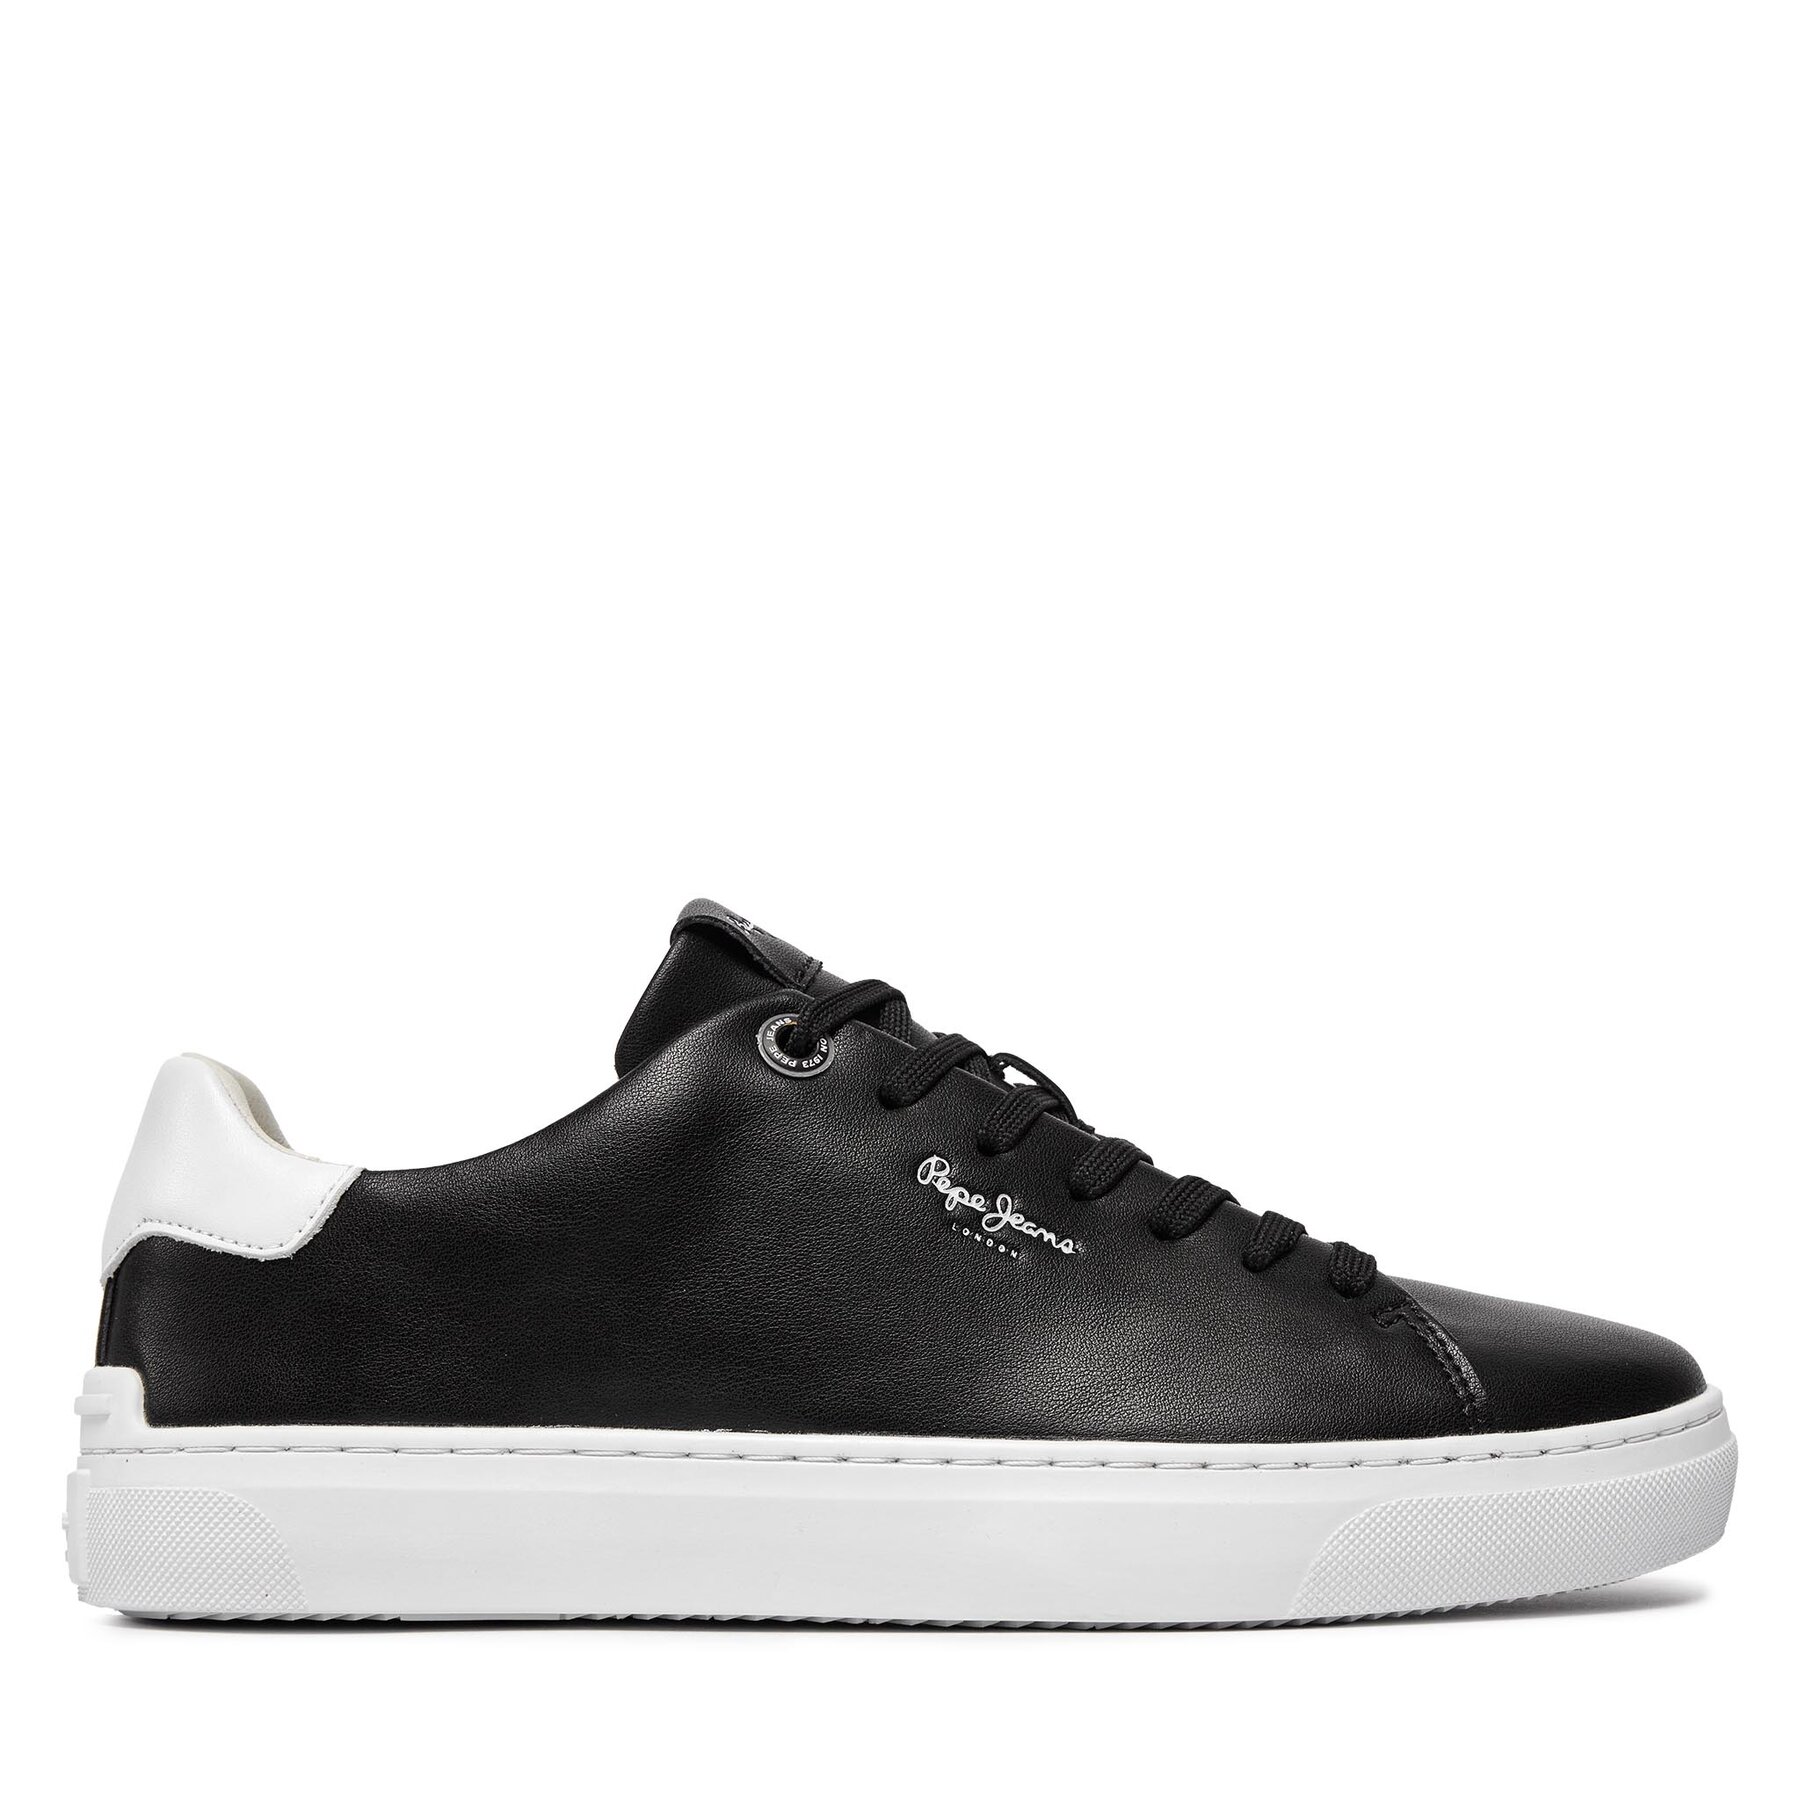 Sneakers Pepe Jeans Camden Basic M PMS00007 Black 999 von Pepe Jeans